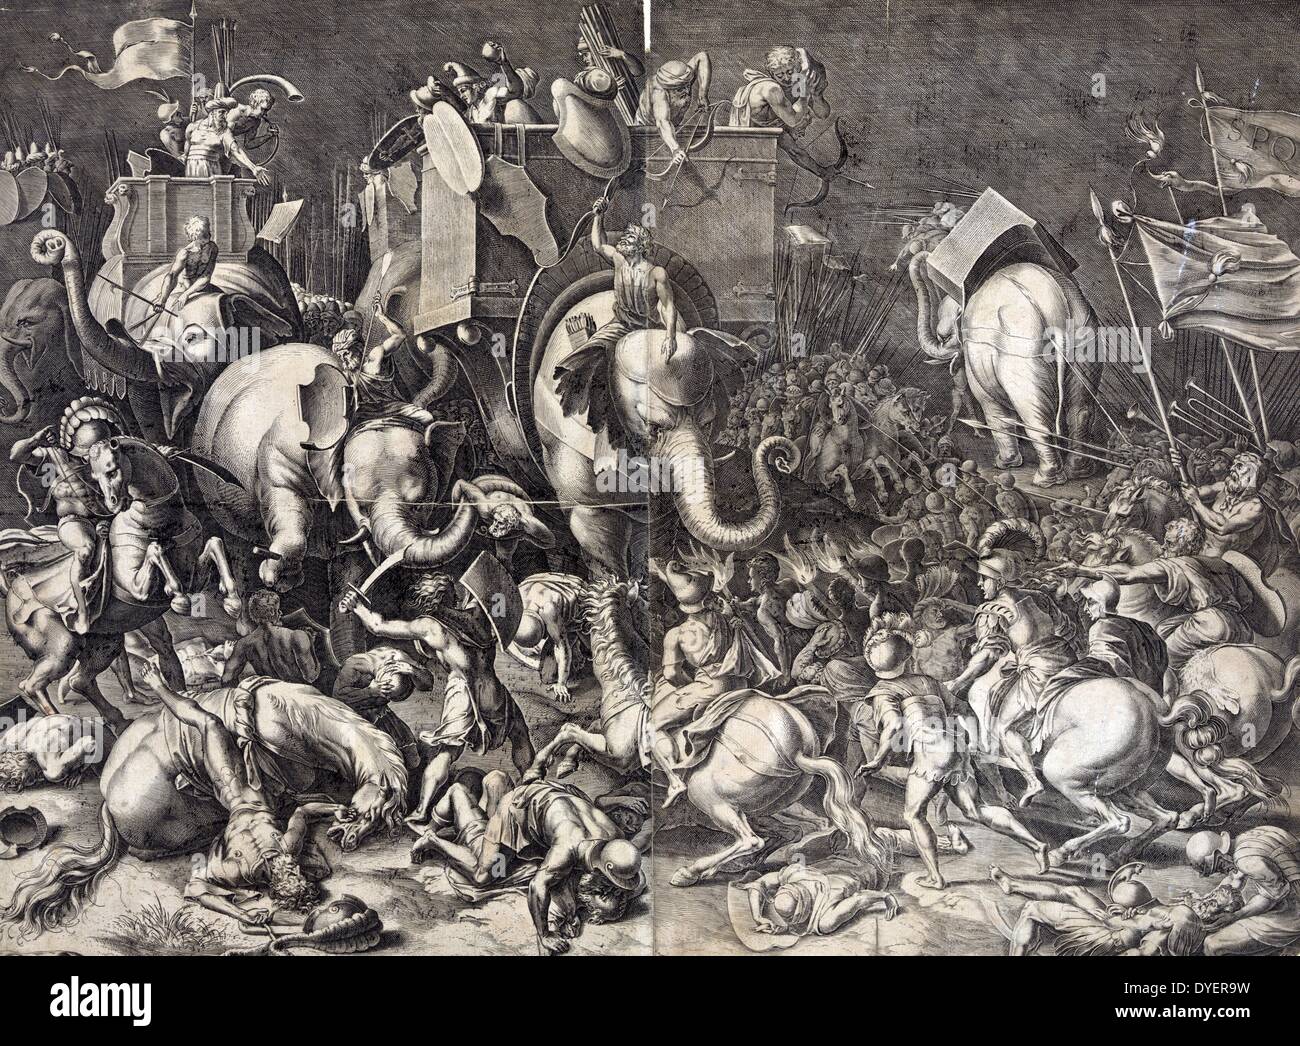 Print showing Scipio Africanus on horseback with Roman soldiers engaging Hannibal, riding a war elephant, during the battle of Zama, 202 B.C. Engraving after painting by Cornelis Cort. Stock Photo